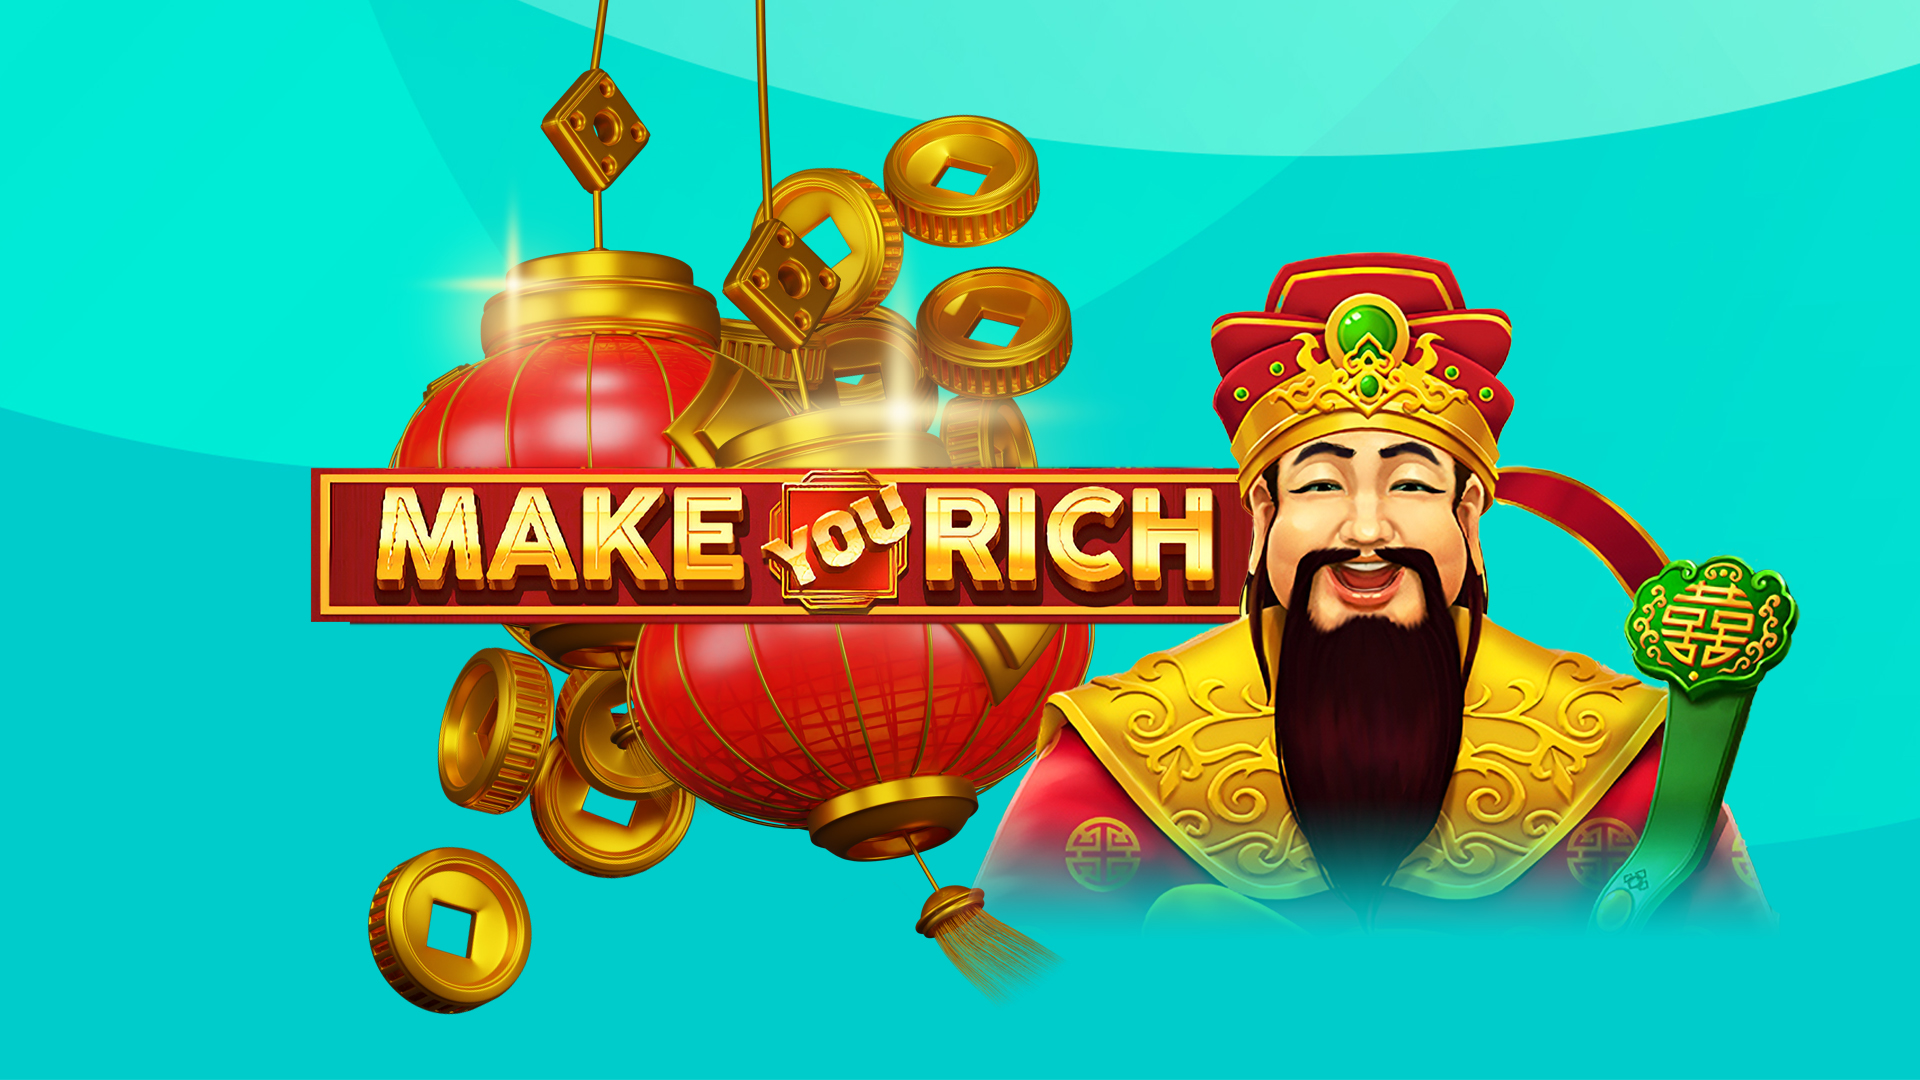 Caishen the god of wealth stands next to the logo for the SlotsLV online slot, Make You Rich, with a Chinese-style lantern hanging from the top of the image on a colorful turquoise background.